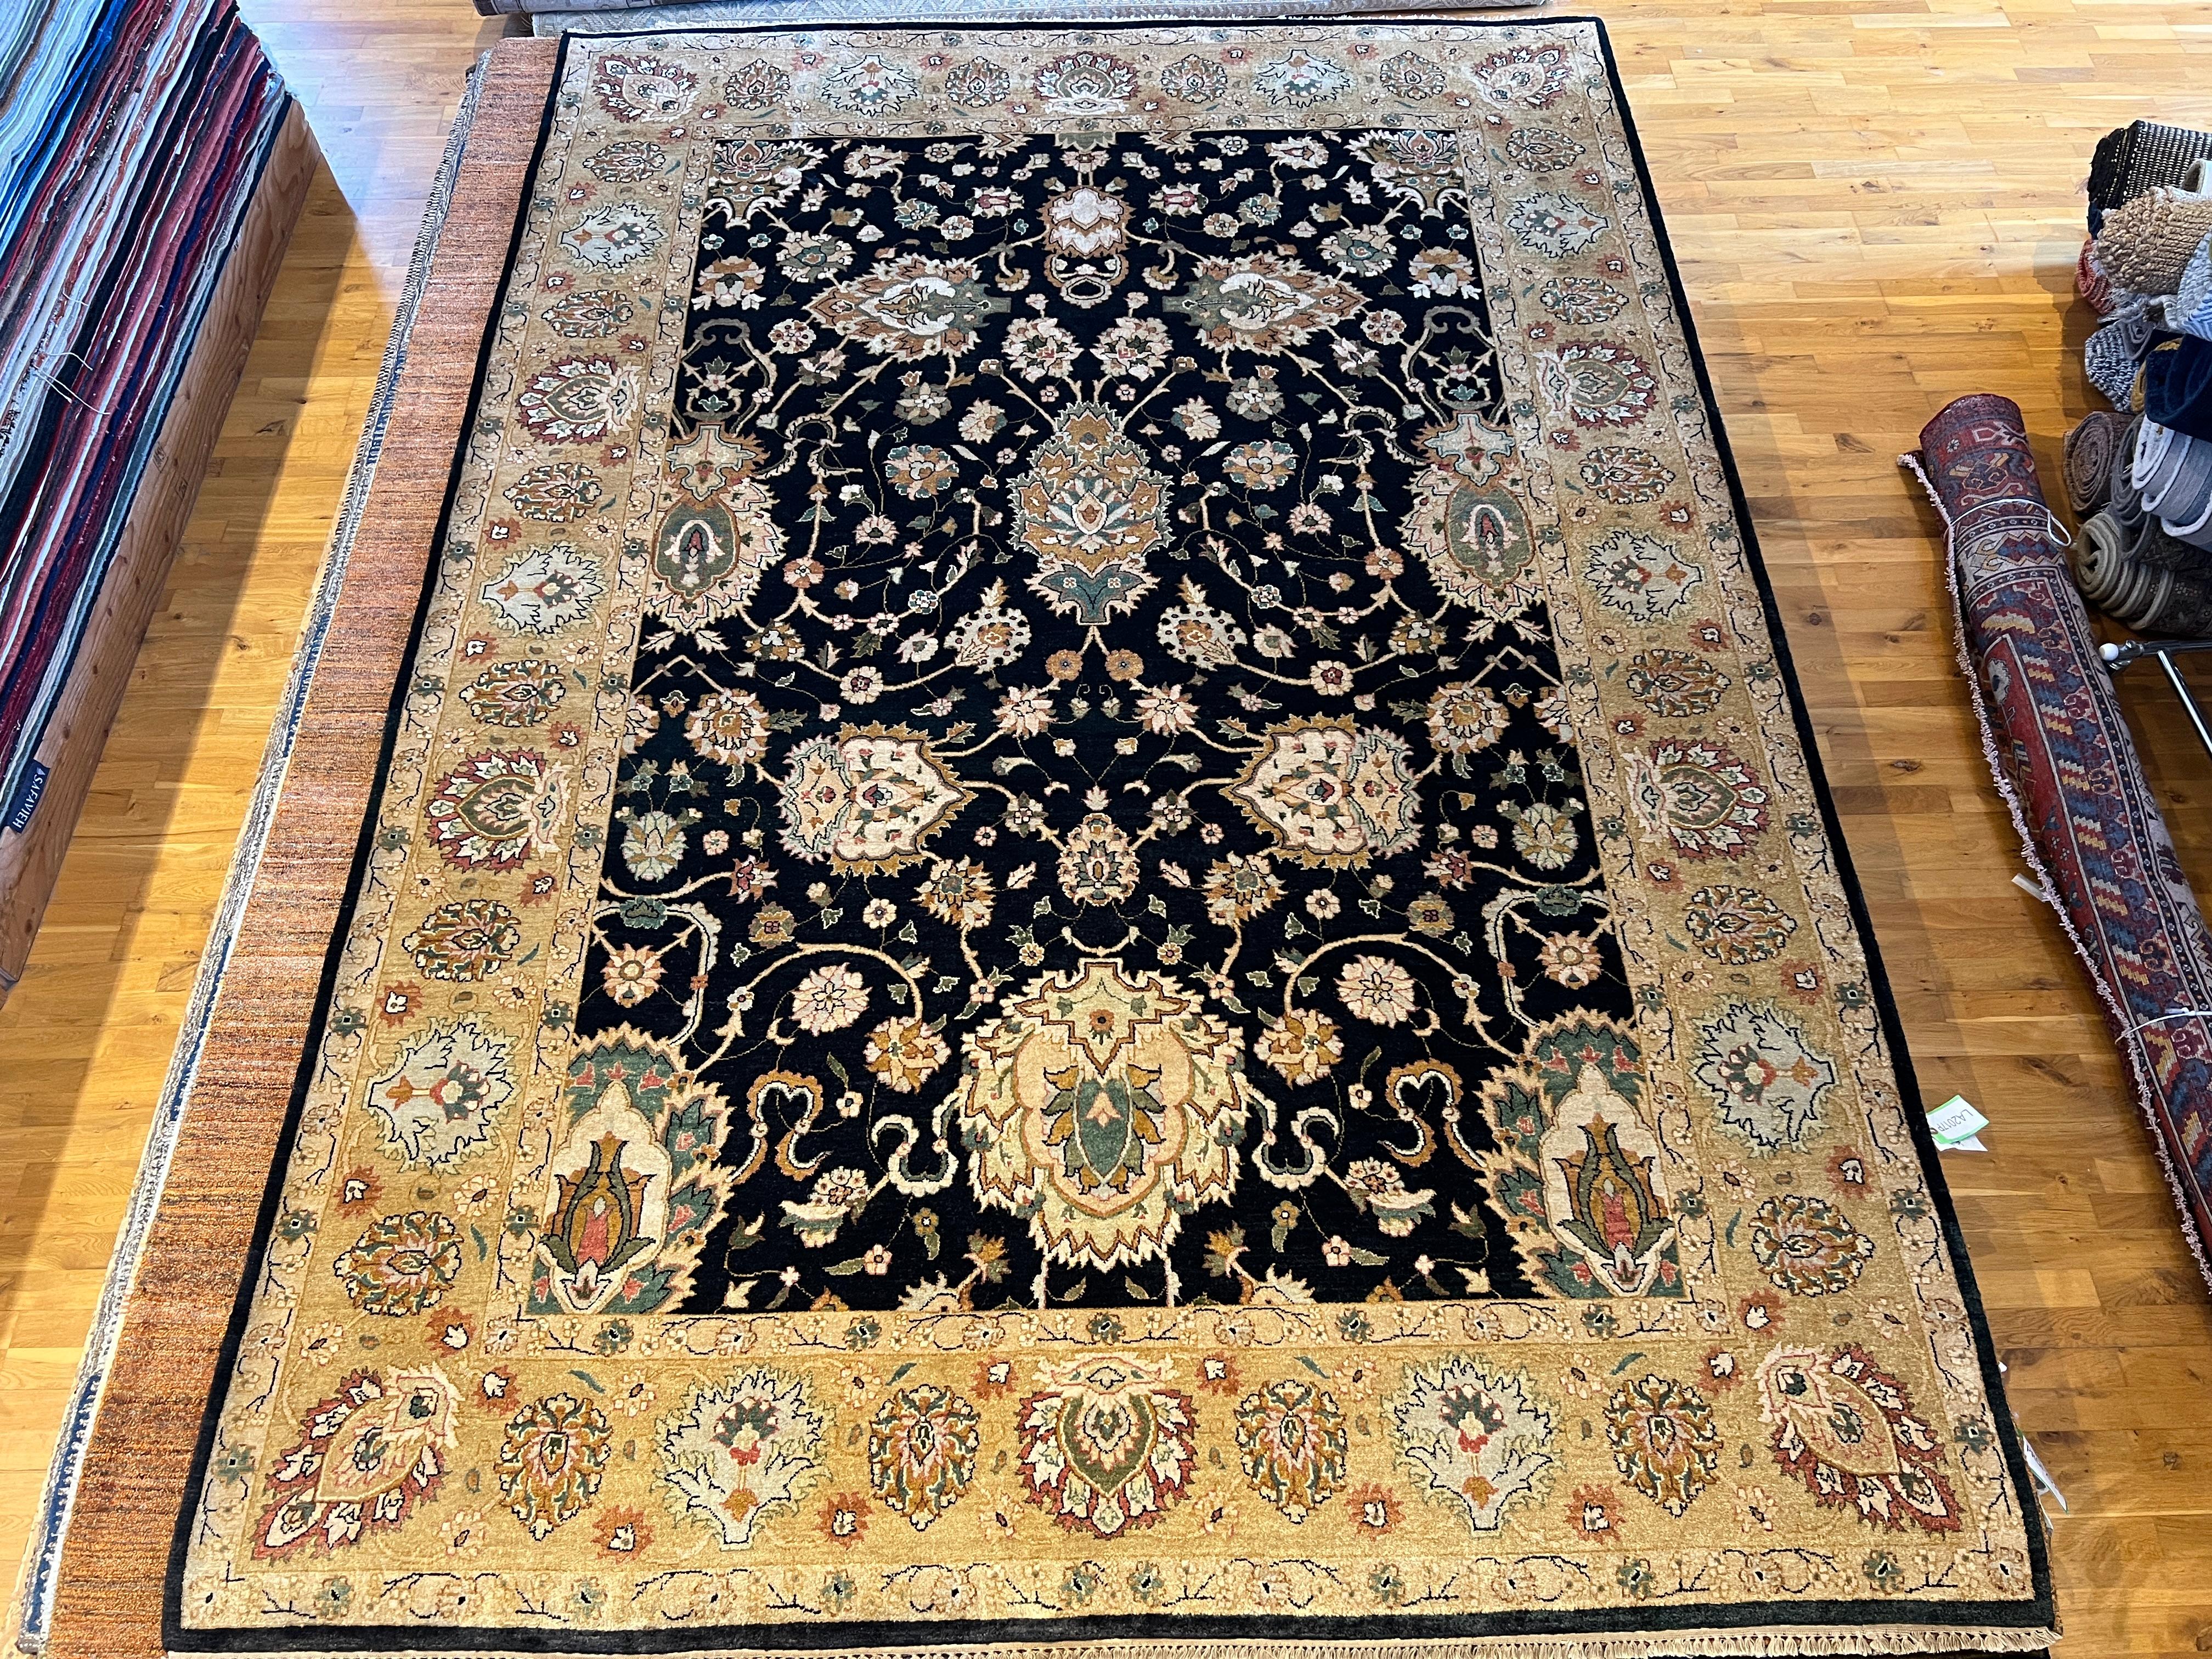 Introducing our beautiful 9'x12' Persian design rug, hand-knotted in India using all wool and natural dyes. Featuring a modernized black field and ivory border, this rug will add a touch of elegance and sophistication to any room. Experience the